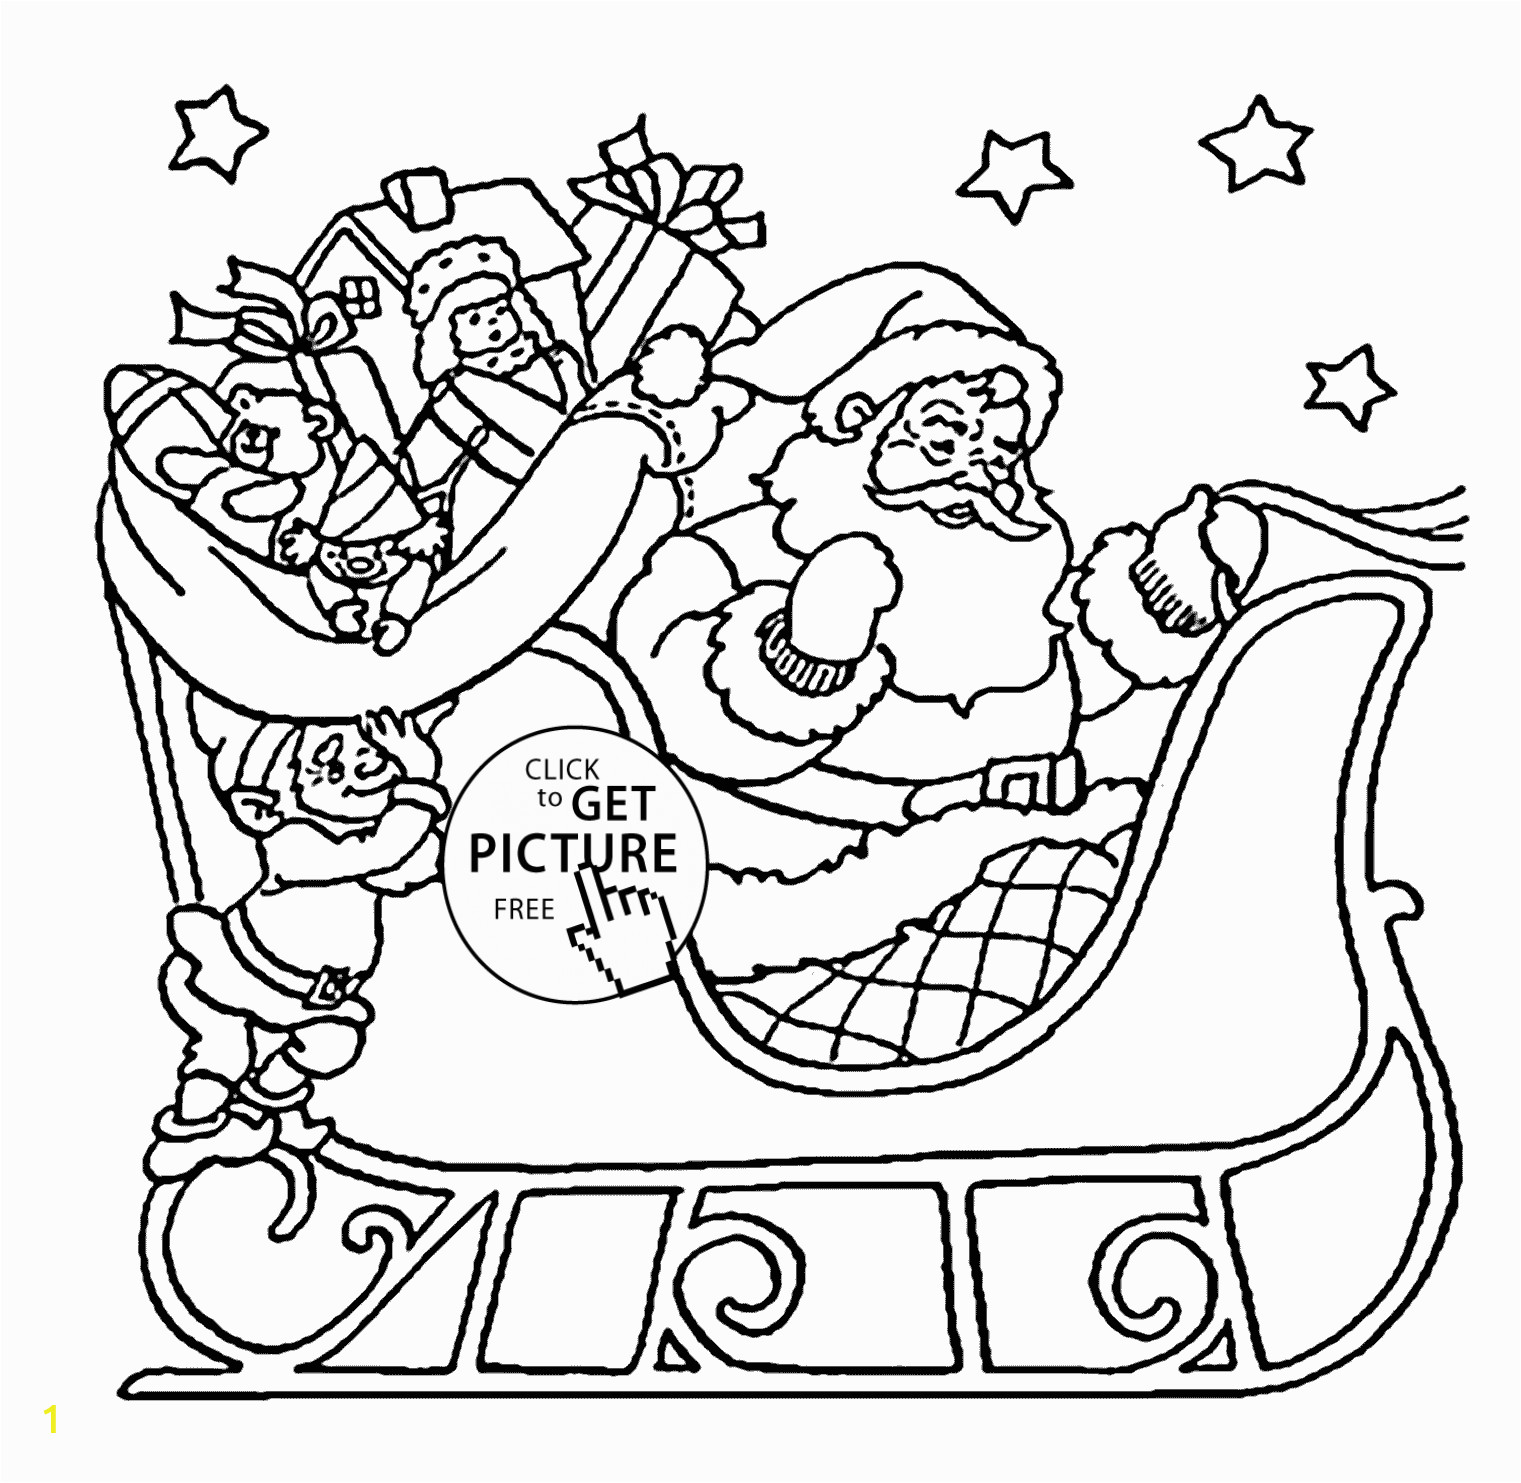 Santa and Sleigh Coloring Pages Printable Santa Claus On Sleigh Coloring Pages for Kids Printable